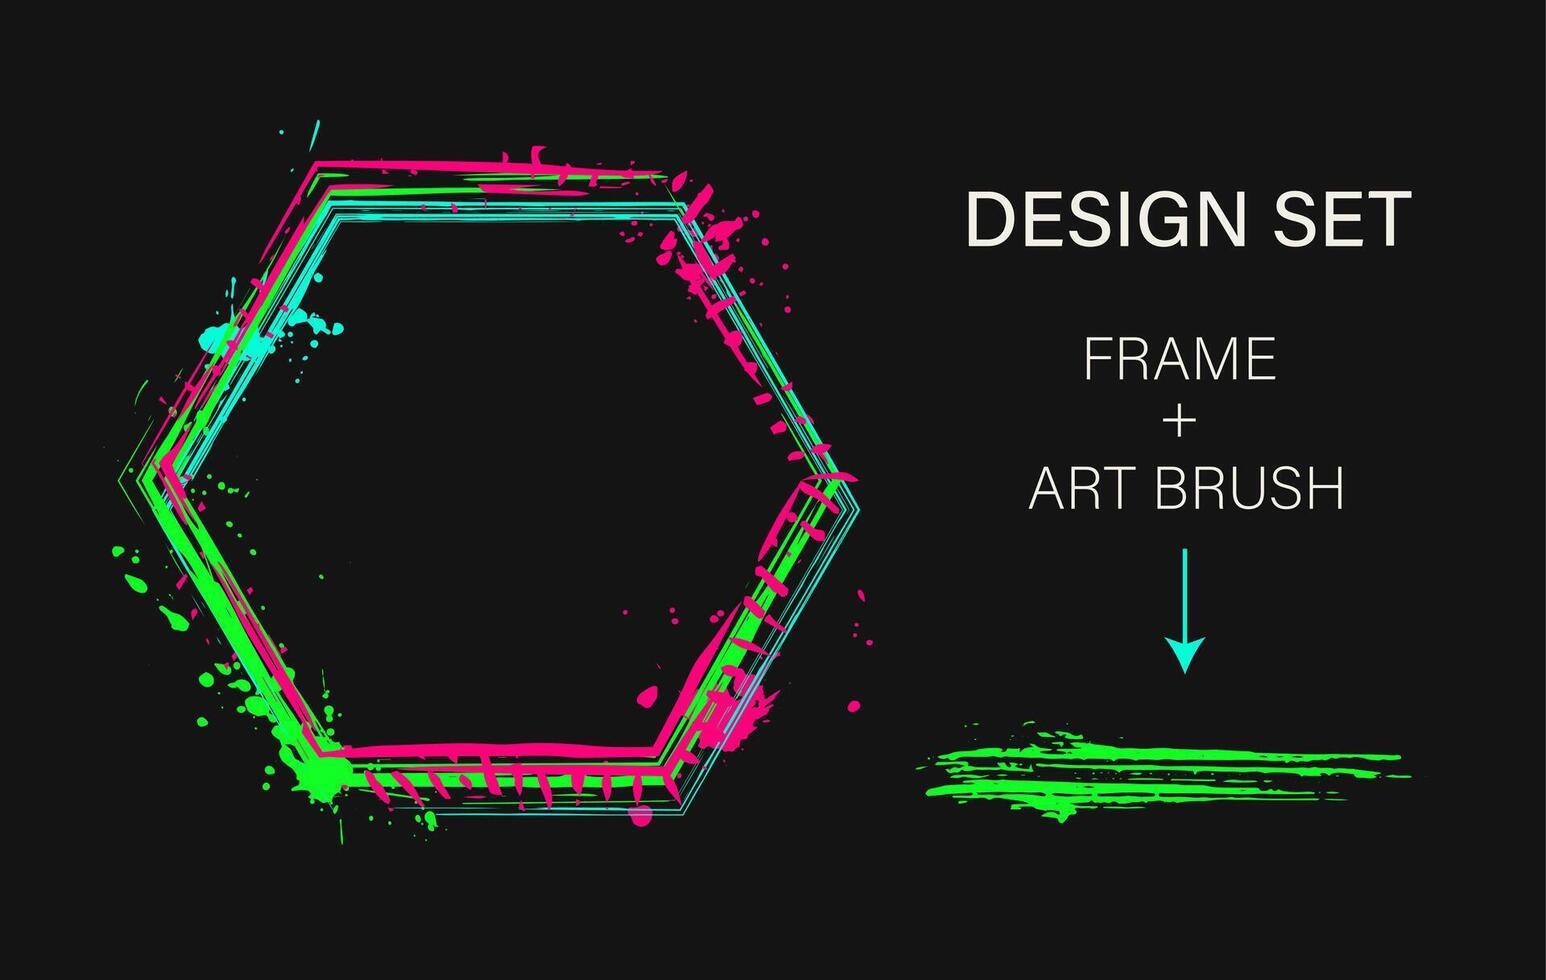 Set of design elements, hexagonal frame, grunge art brush. Geometric shape with copy space, paint brush strokes, spattered paint of neon bright colors. Virtual abstract clip art vector